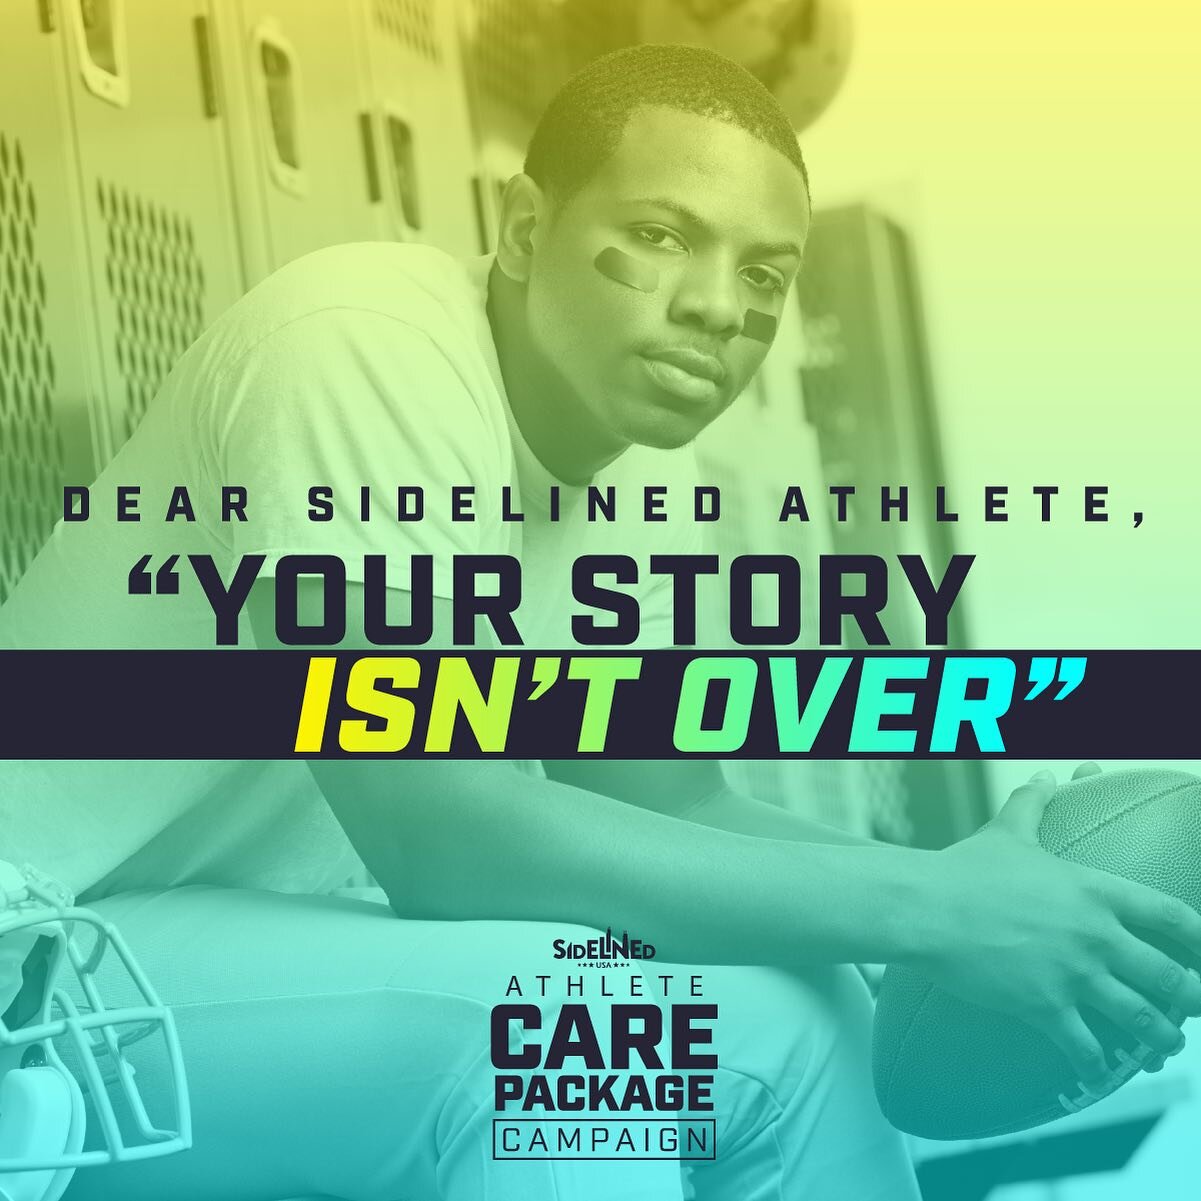 Will you join us in showing medically disqualified student-athletes that they are not forgotten and that their story isn't over? 

Our team goal is to fund 200 care packages this October. Each care package costs $55 including shipping. Anything you c